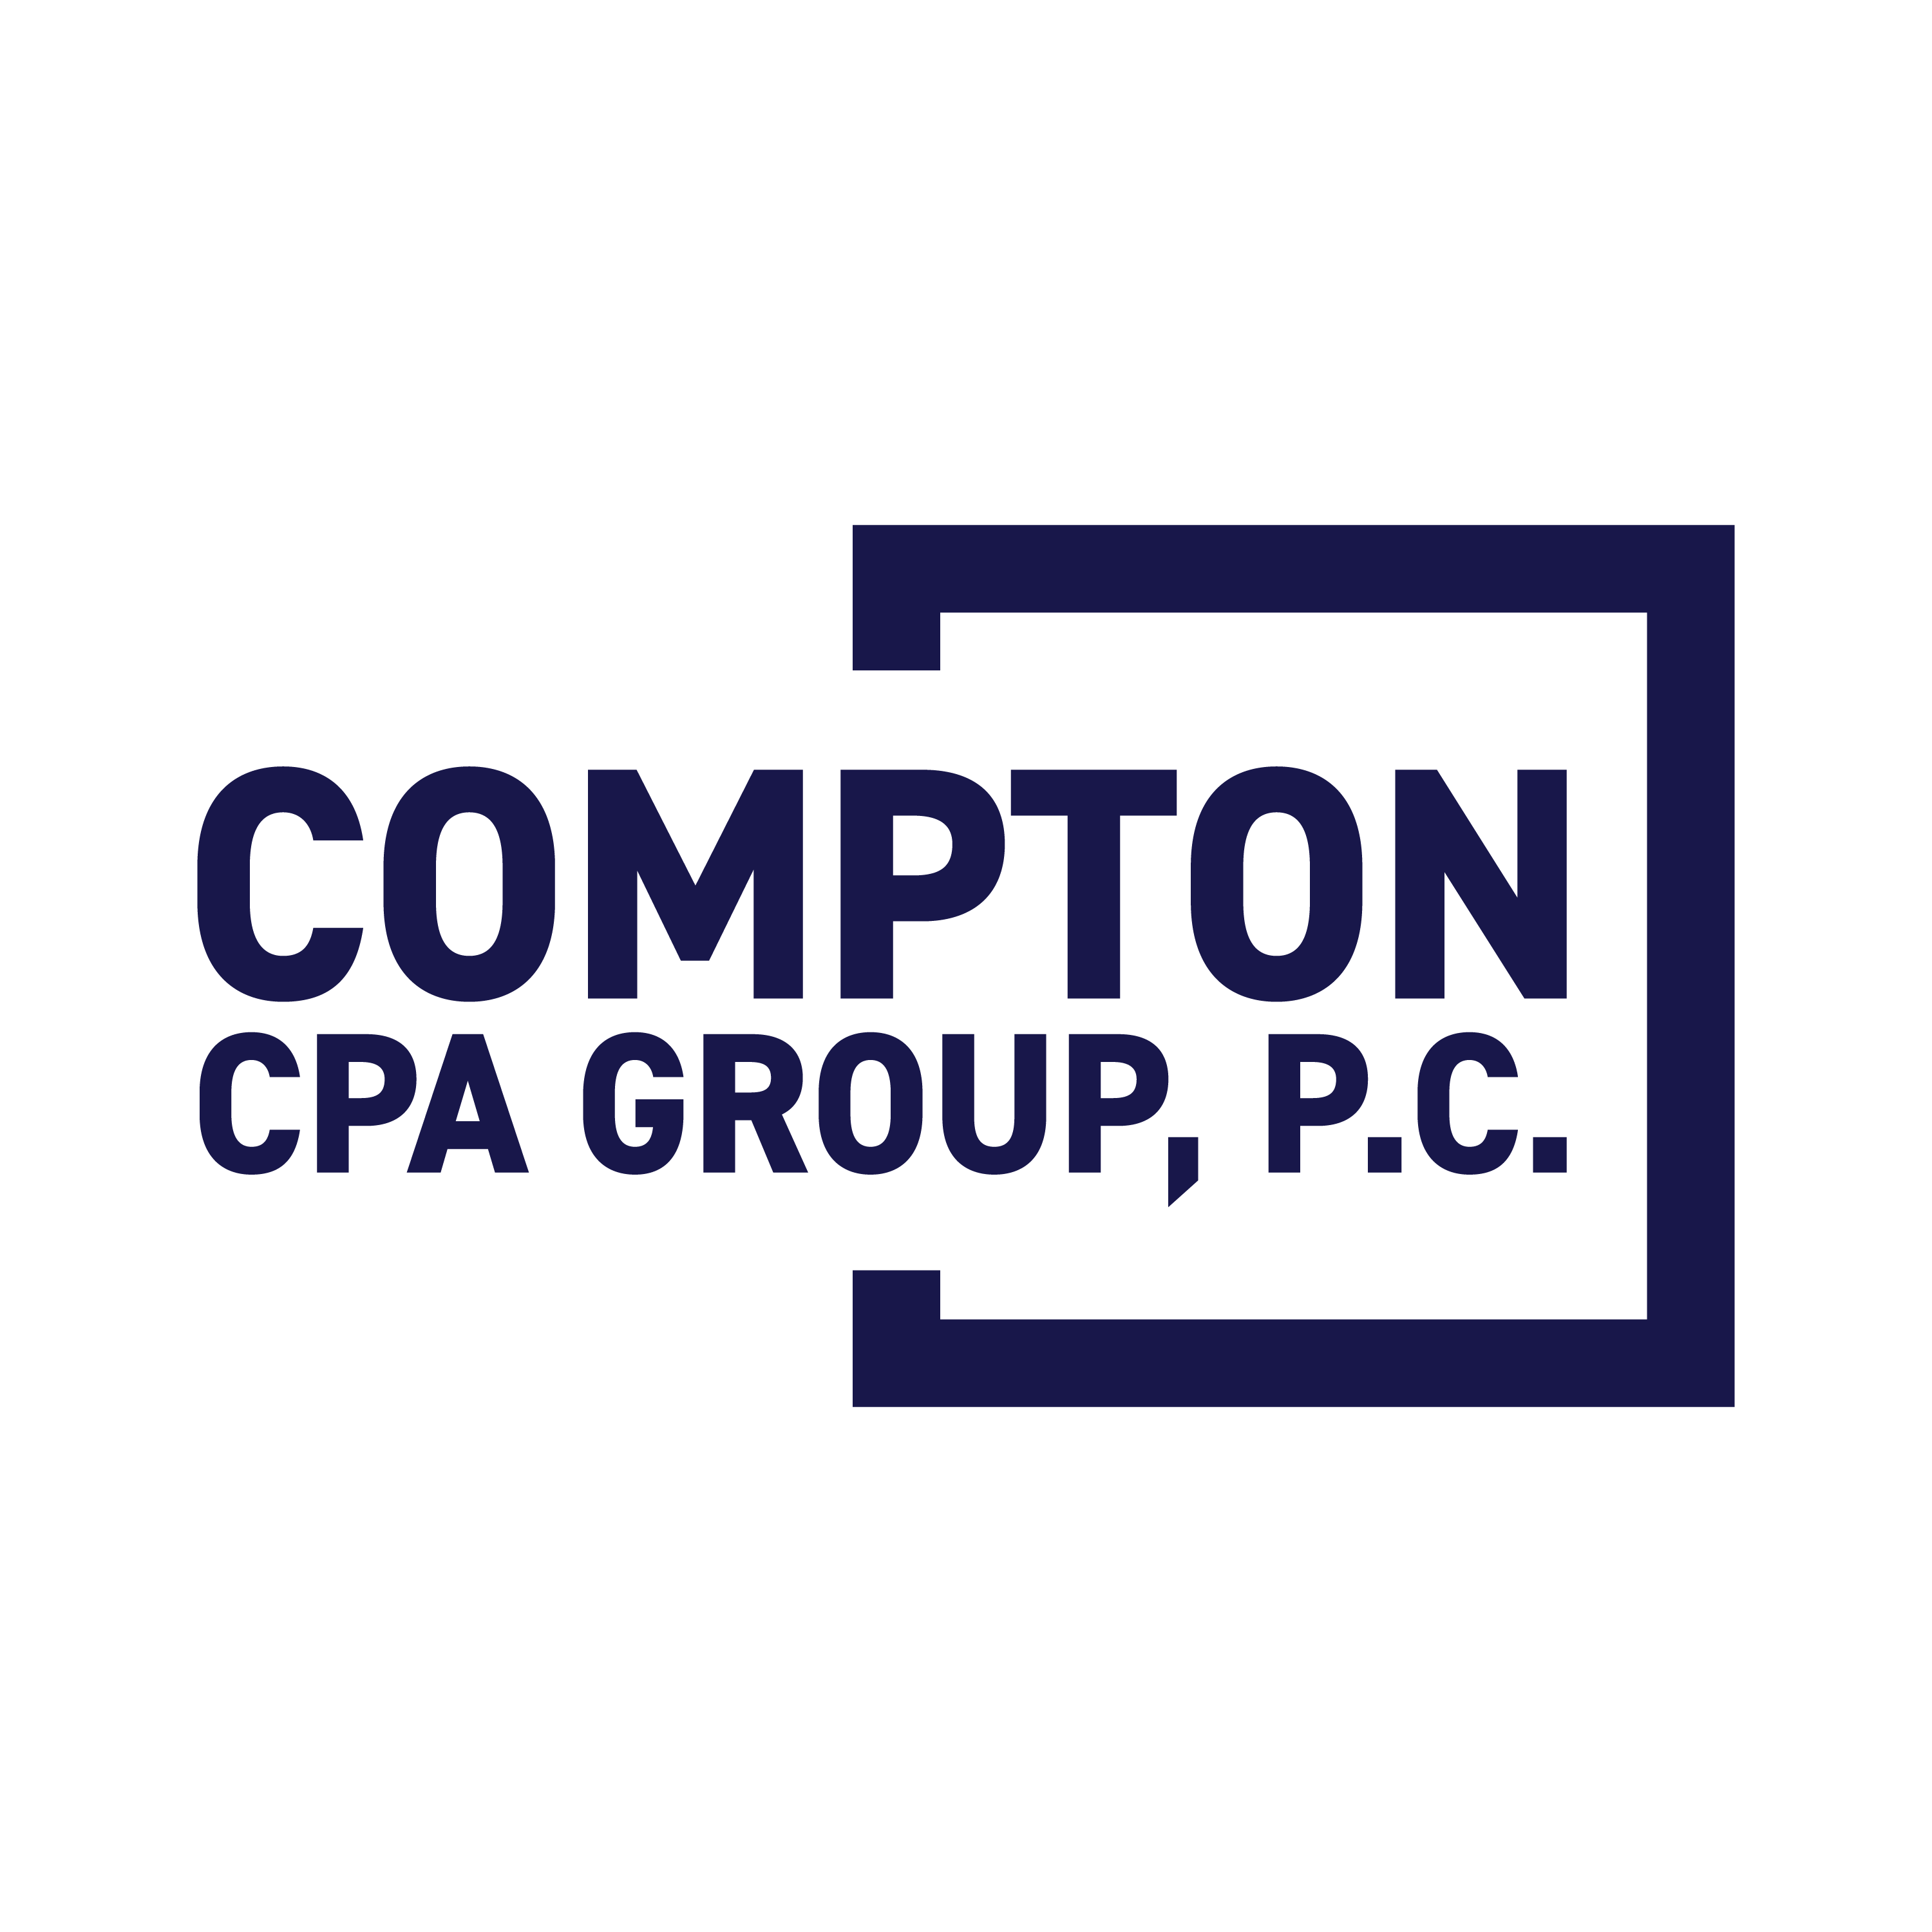 Compton CPA Group, P.C.